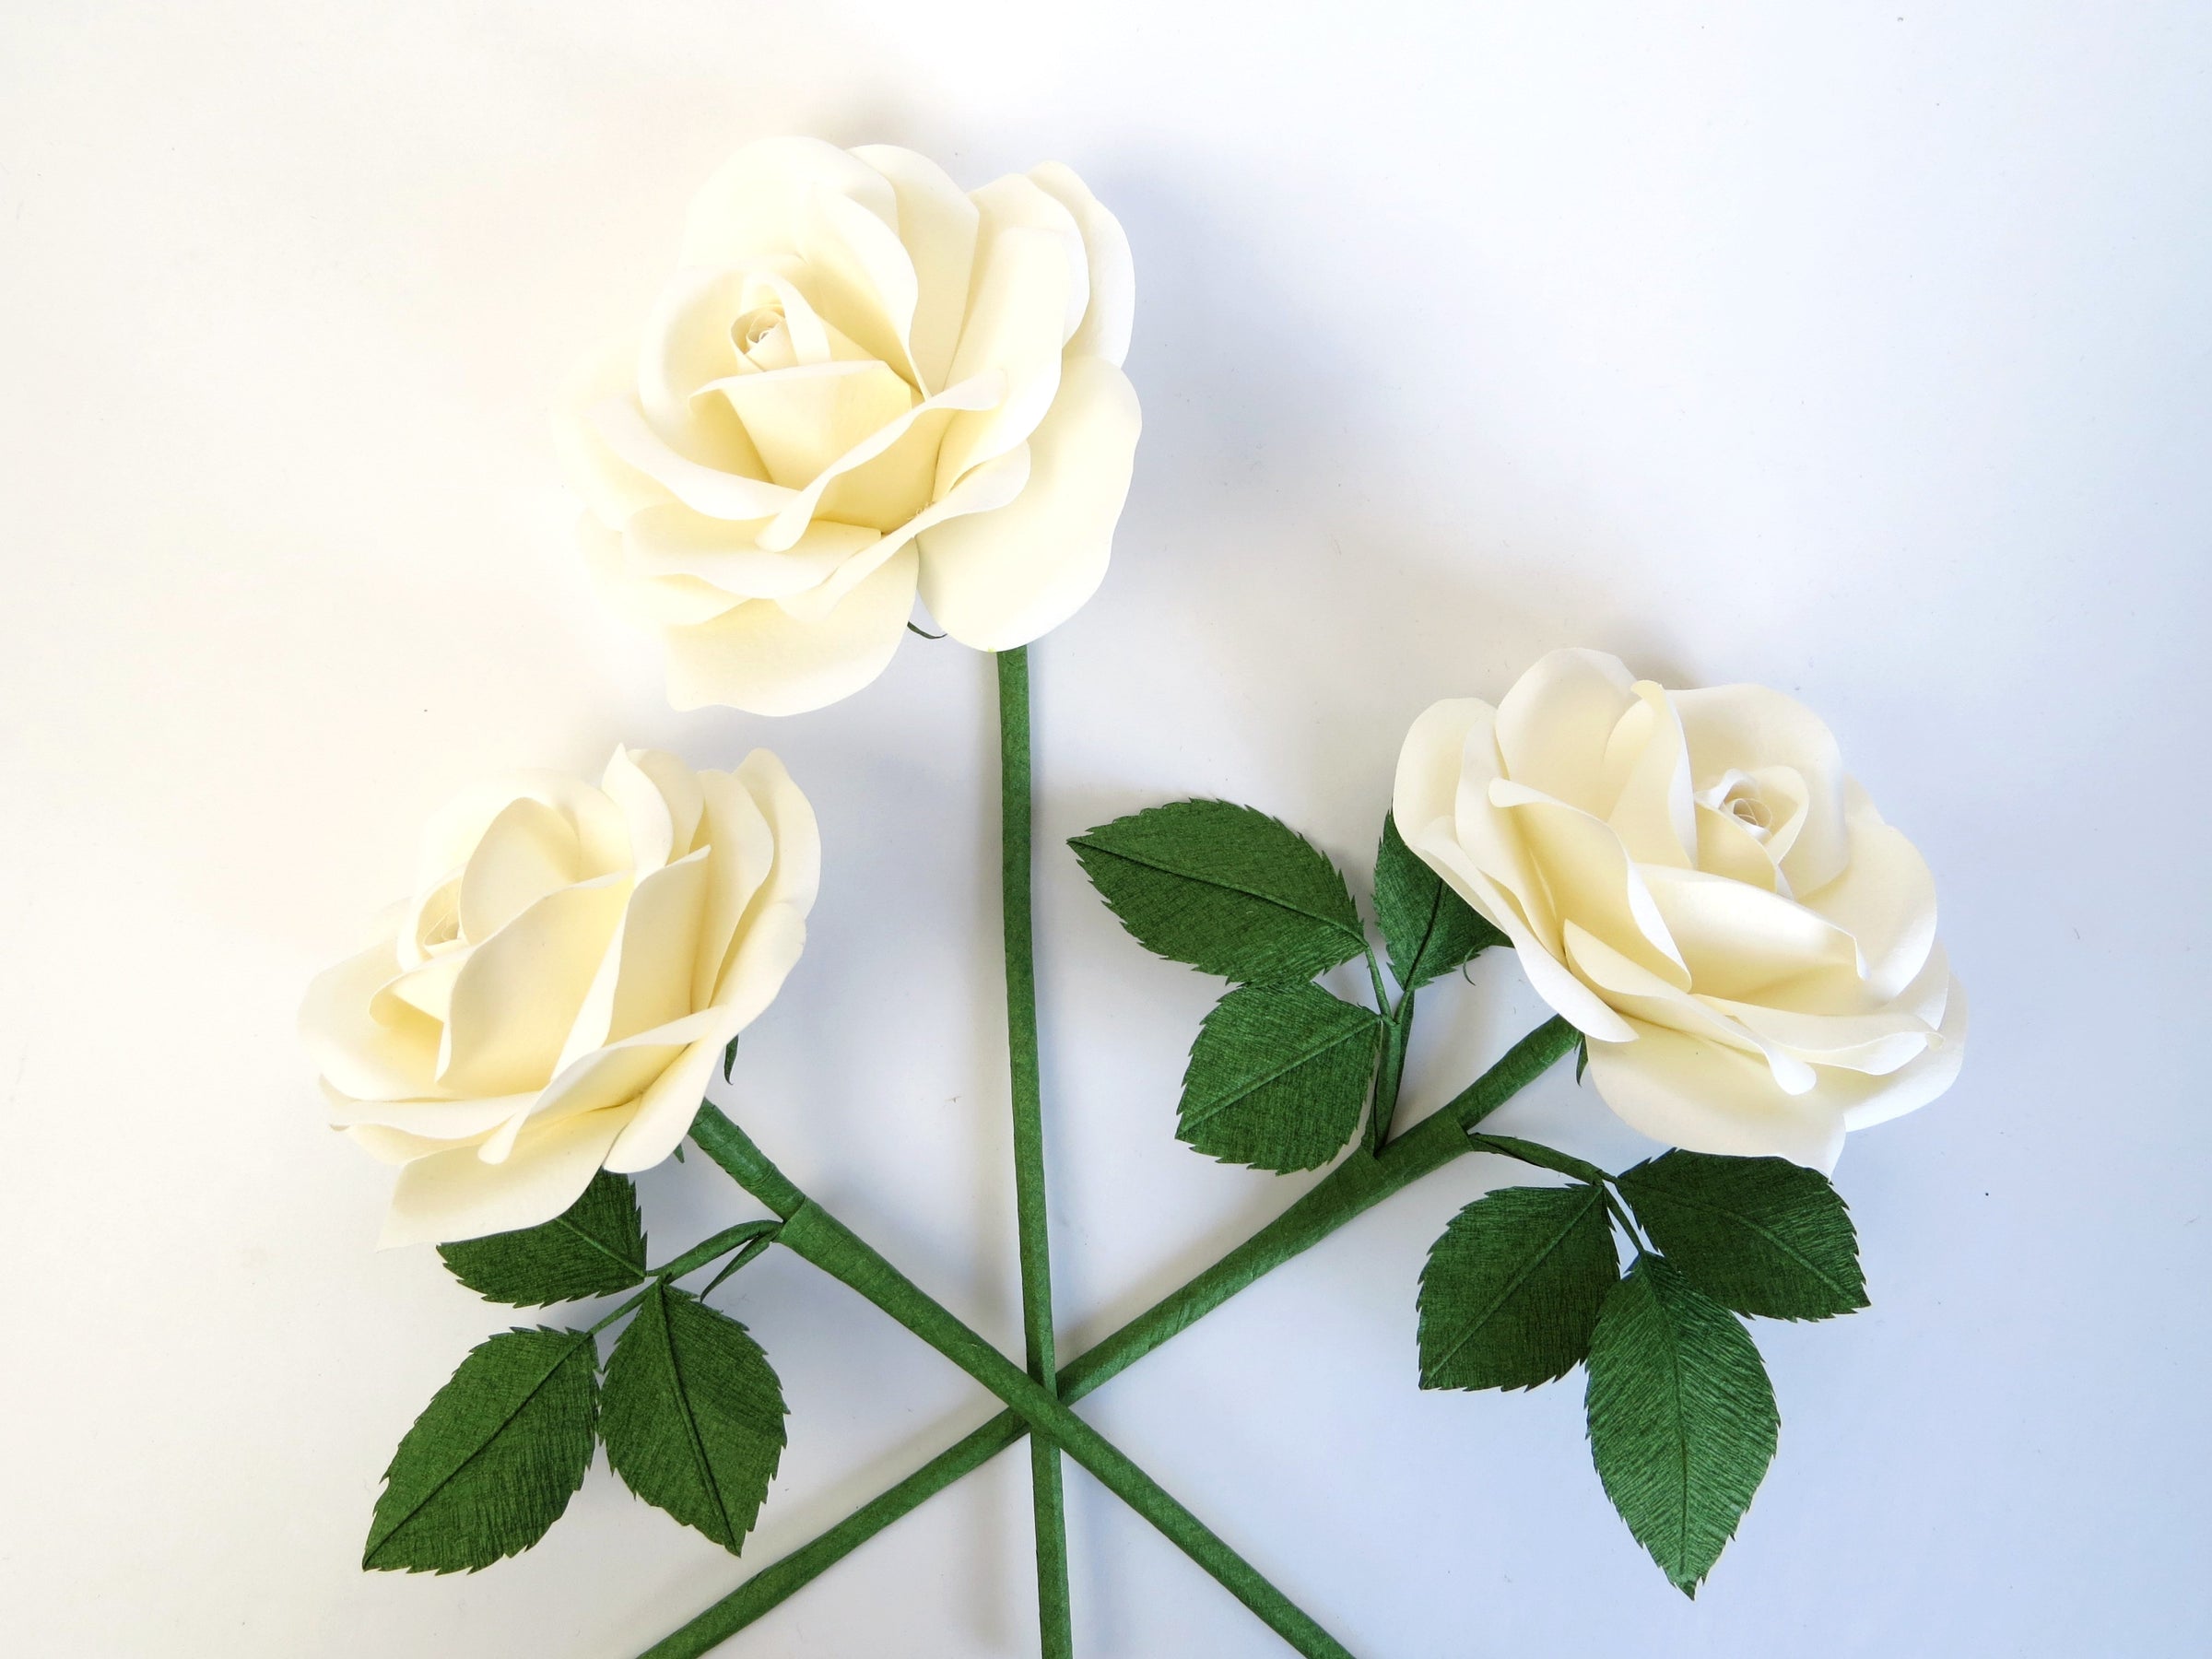 Three white cotton paper roses randomly laid out next to each other on a light grey background. The left rose has three green leaves attached, the high middle rose has no leaves and the right rose has six green leaves